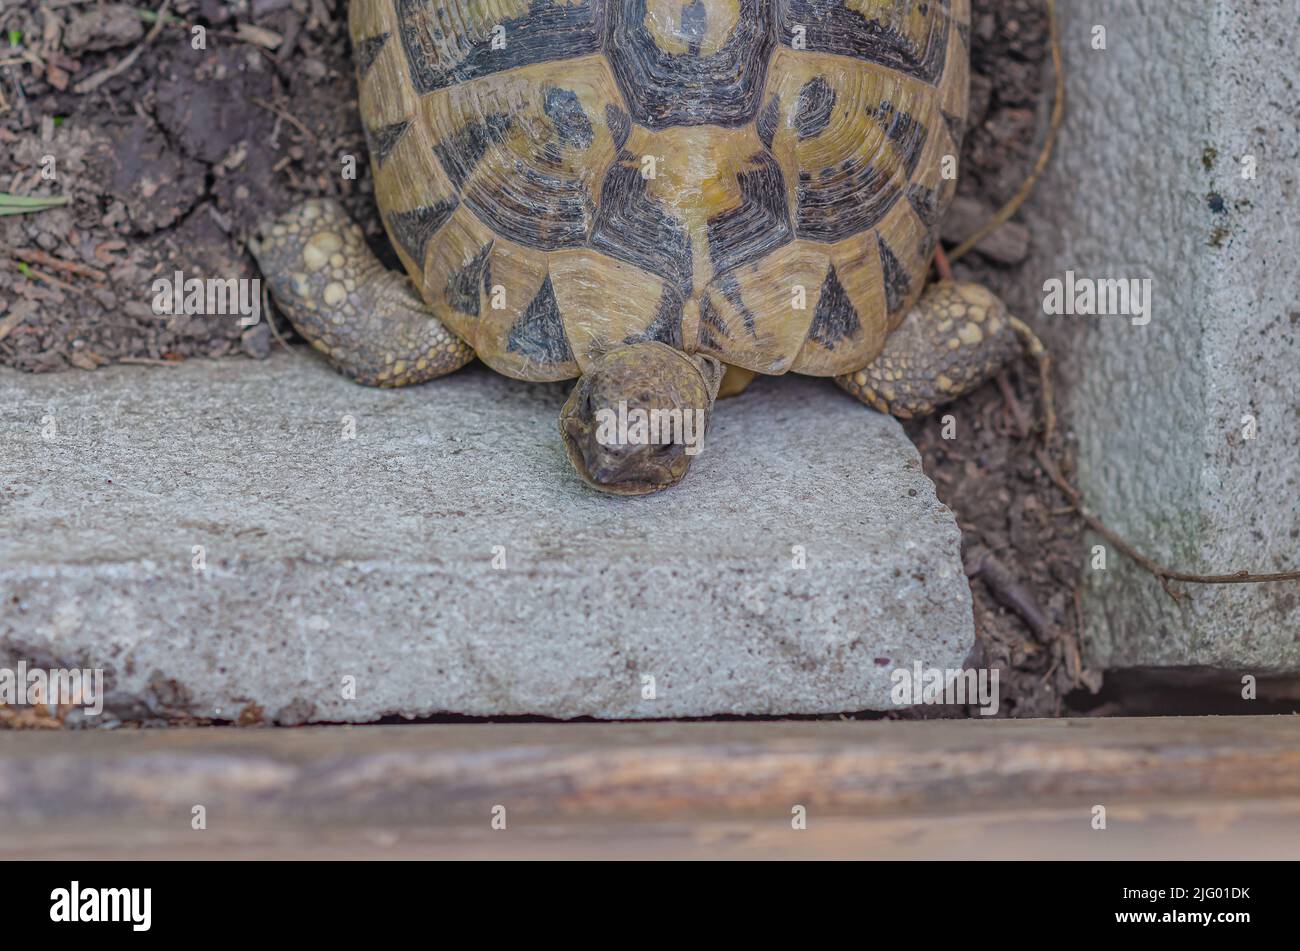 Close-up view of turtle basking near rock. Reproduction of turtles at home. Stock Photo